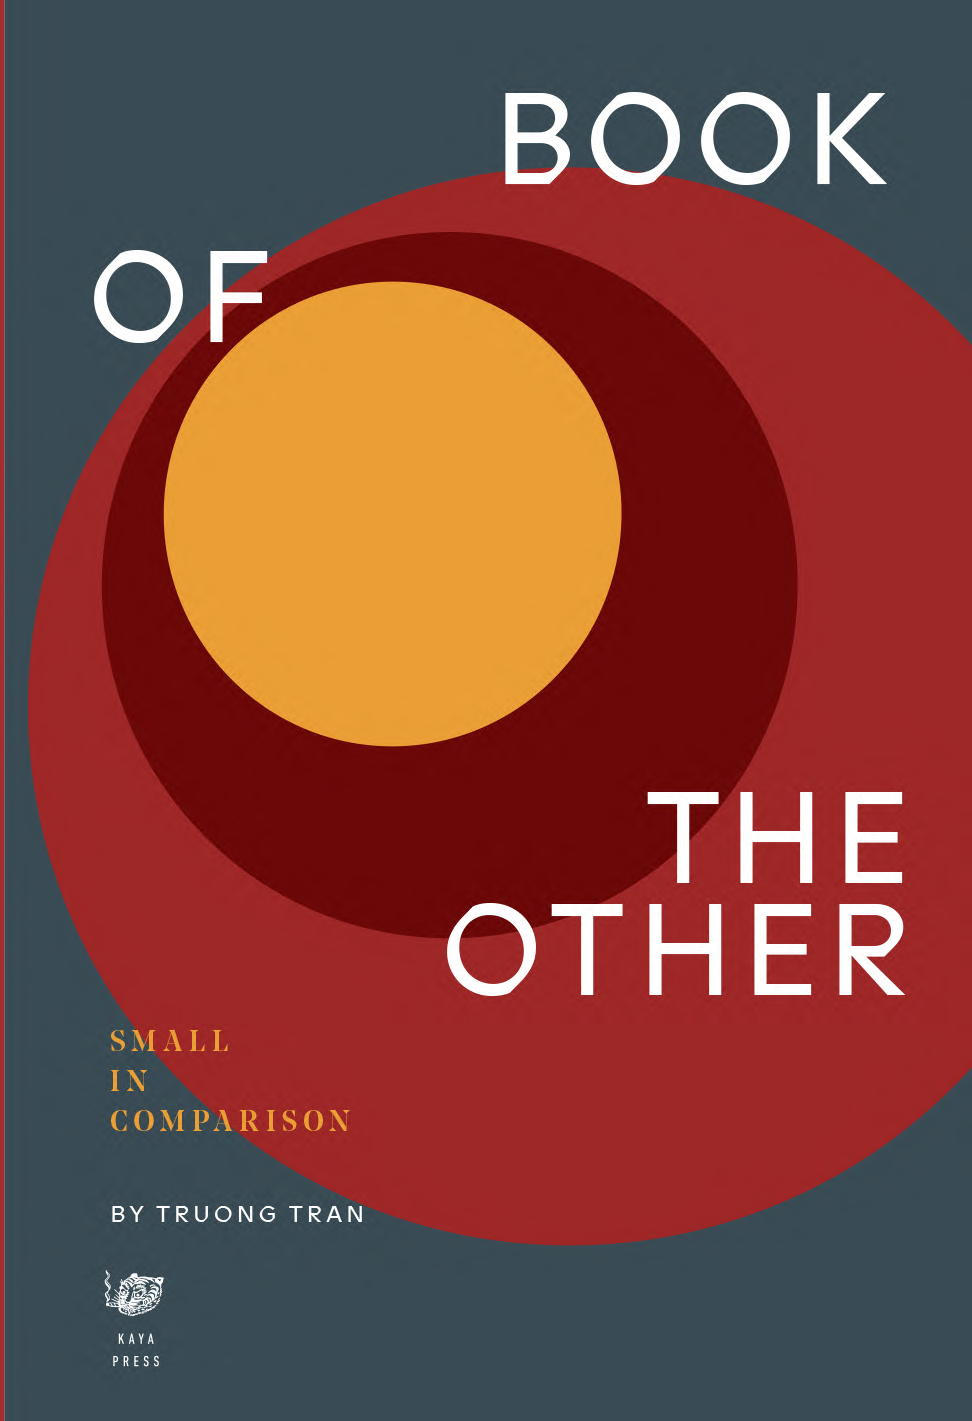 book of the other_truong tran